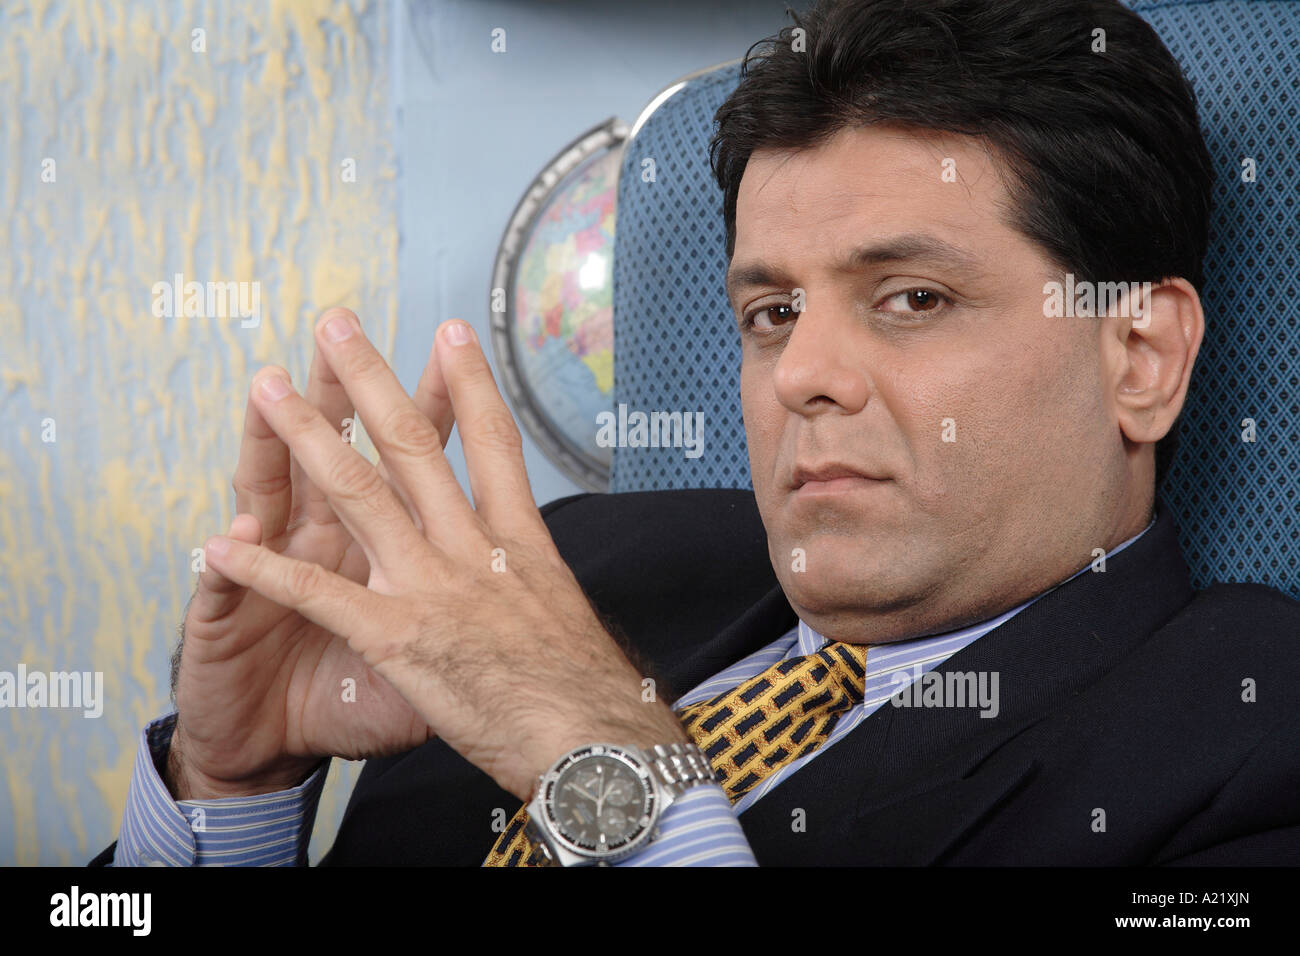 Executive Boss sitting in his cabin well established businessman both the hands joined thinking wrist watch Stock Photo